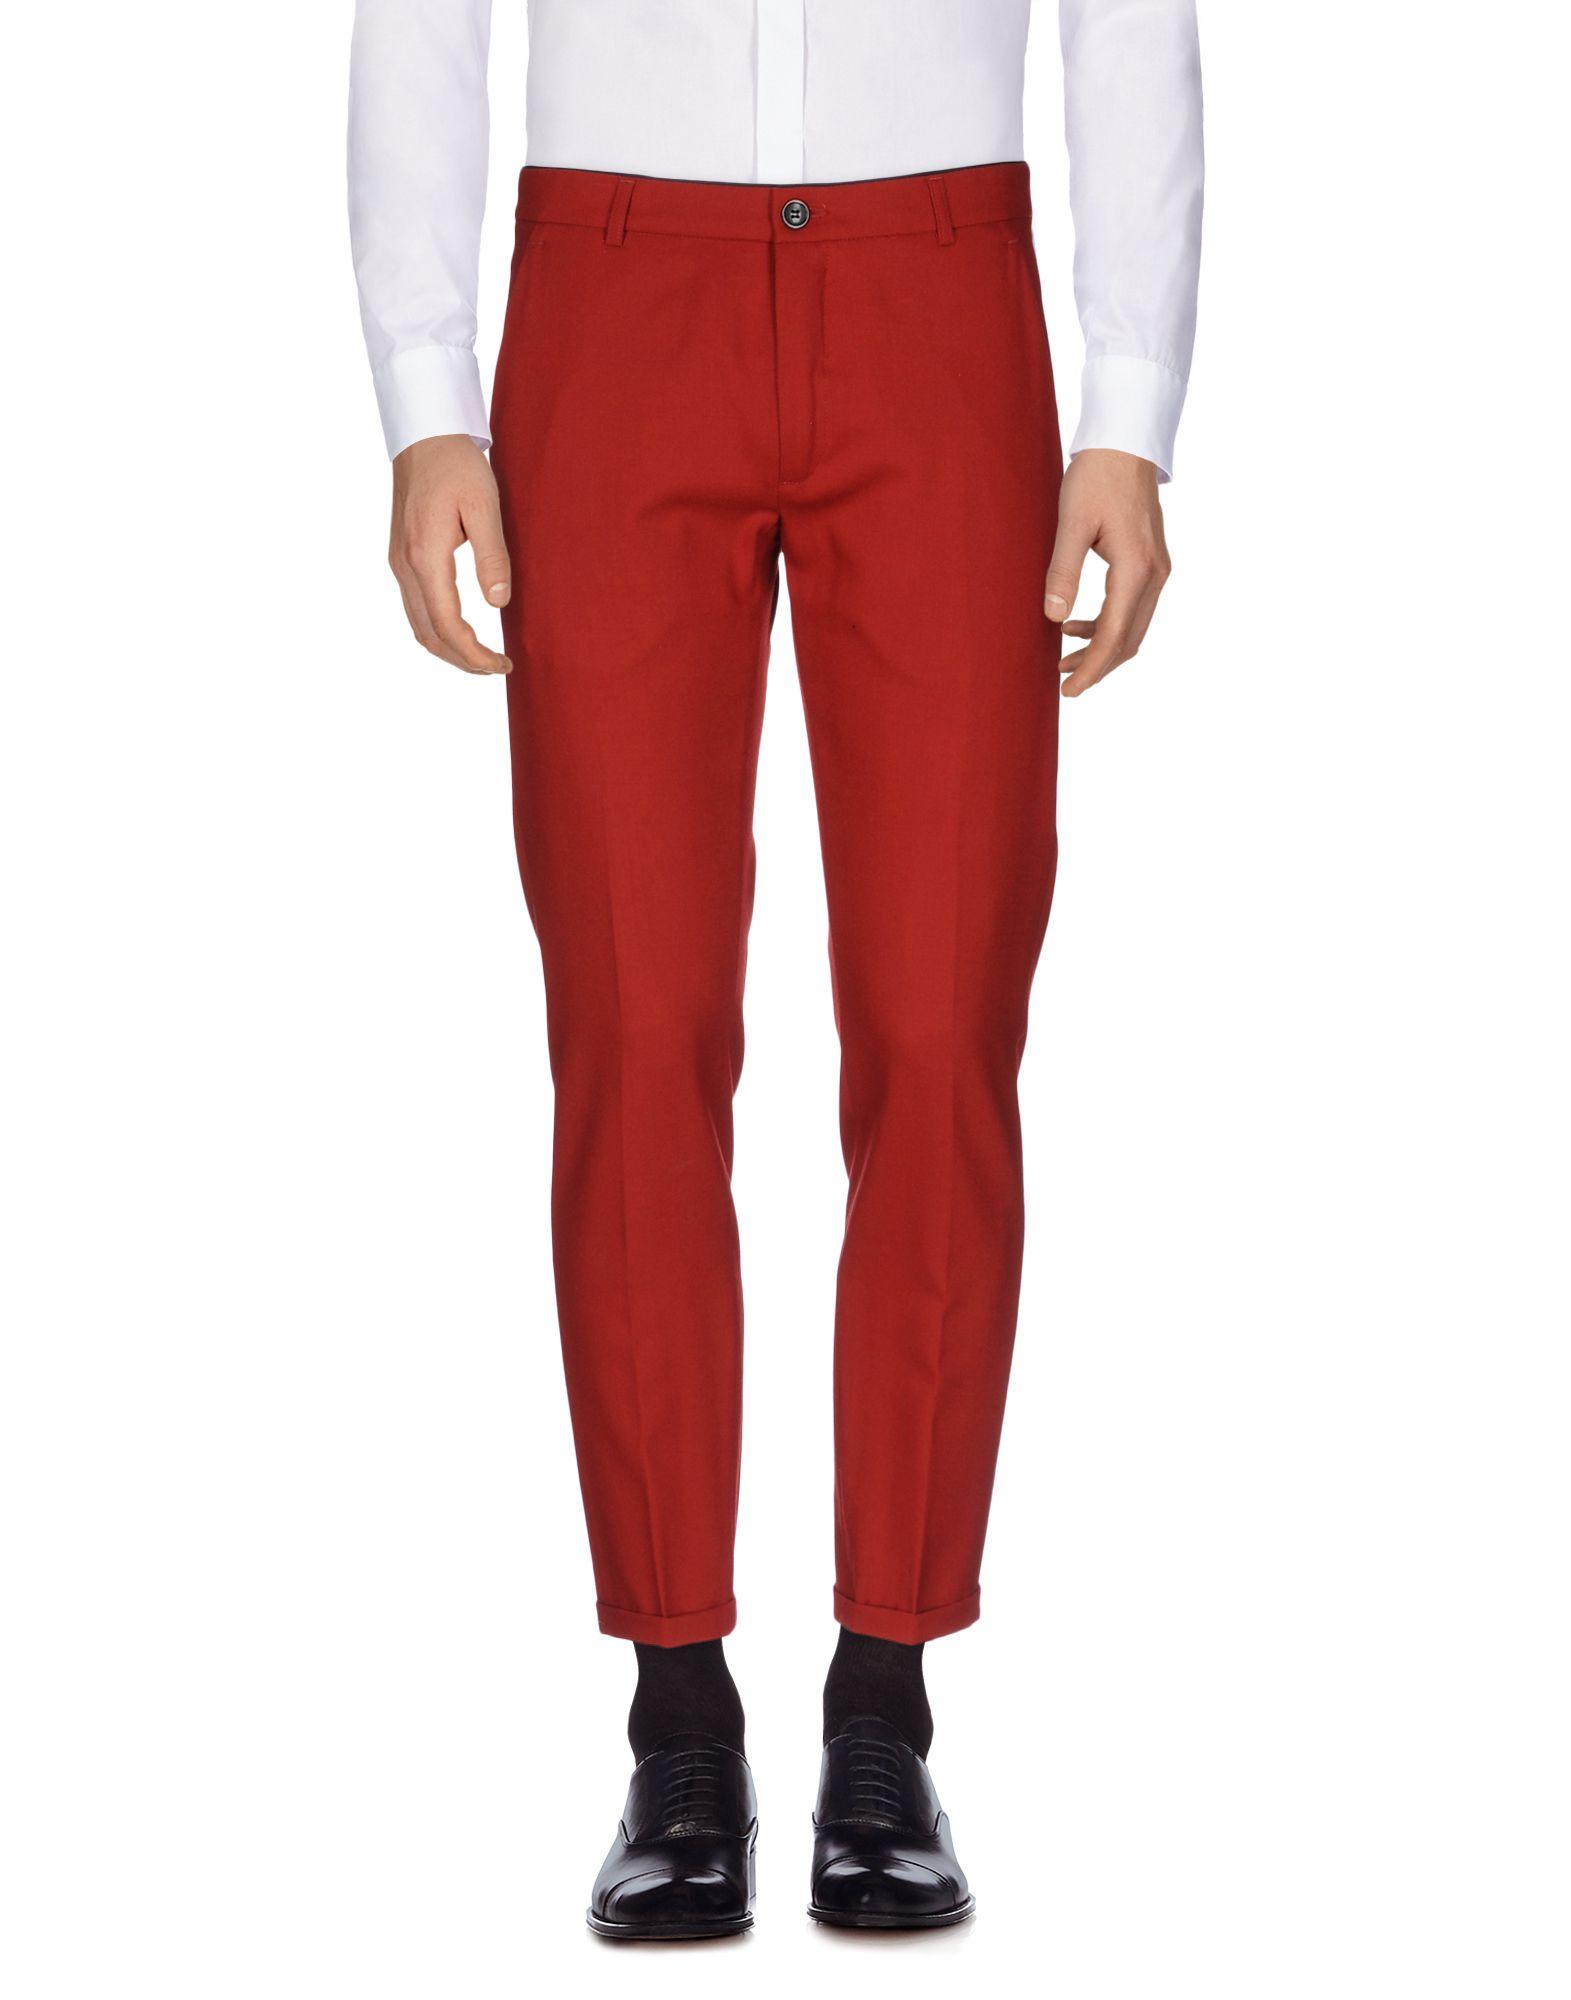 Lyst - Department 5 Casual Pants in Red for Men